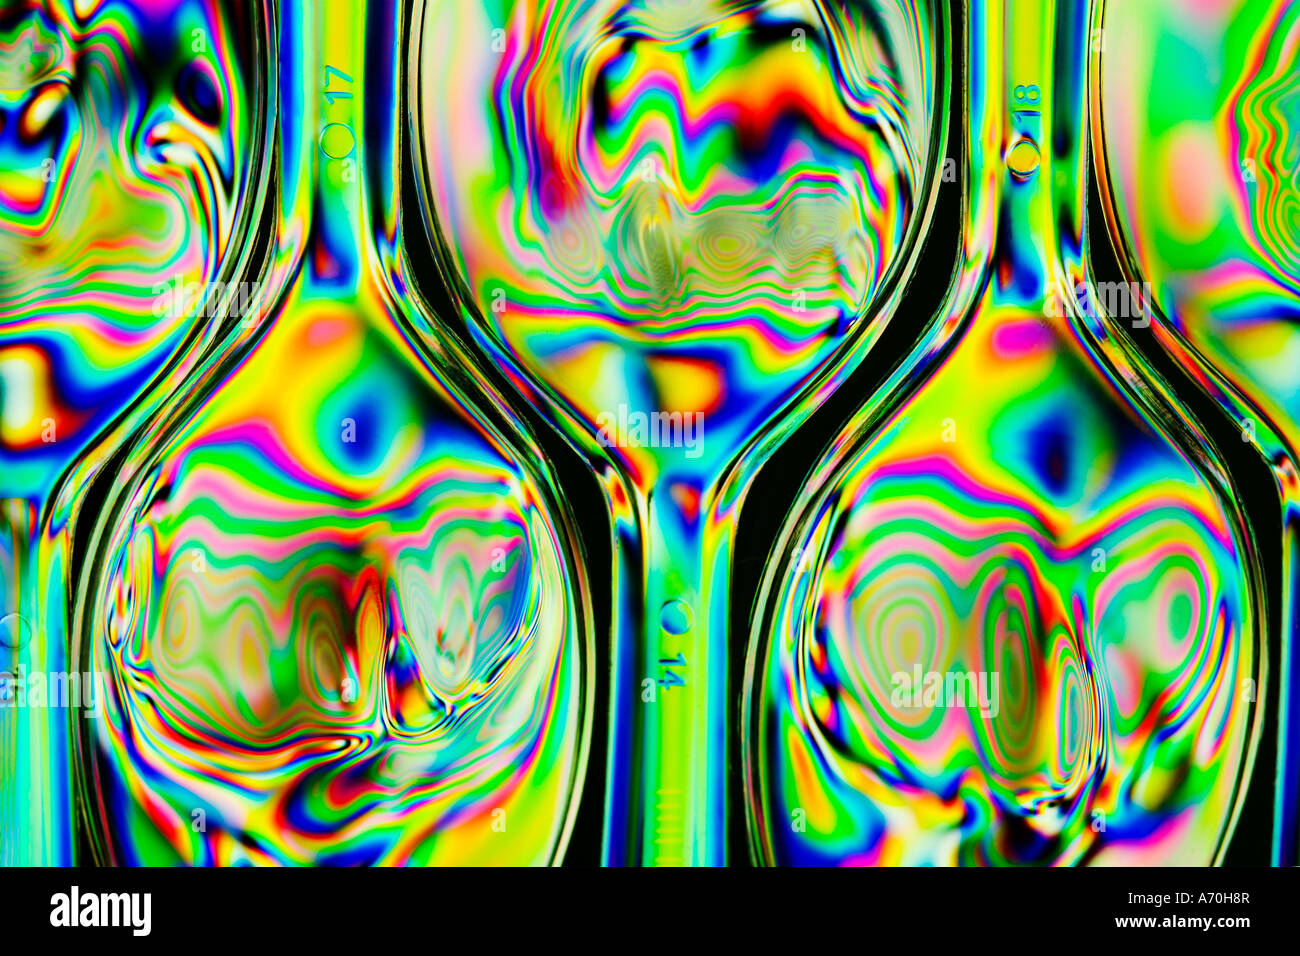 Cross Polarised abstract image of plastic spoons taken with a macro lens close-up showing stress patterns Stock Photo